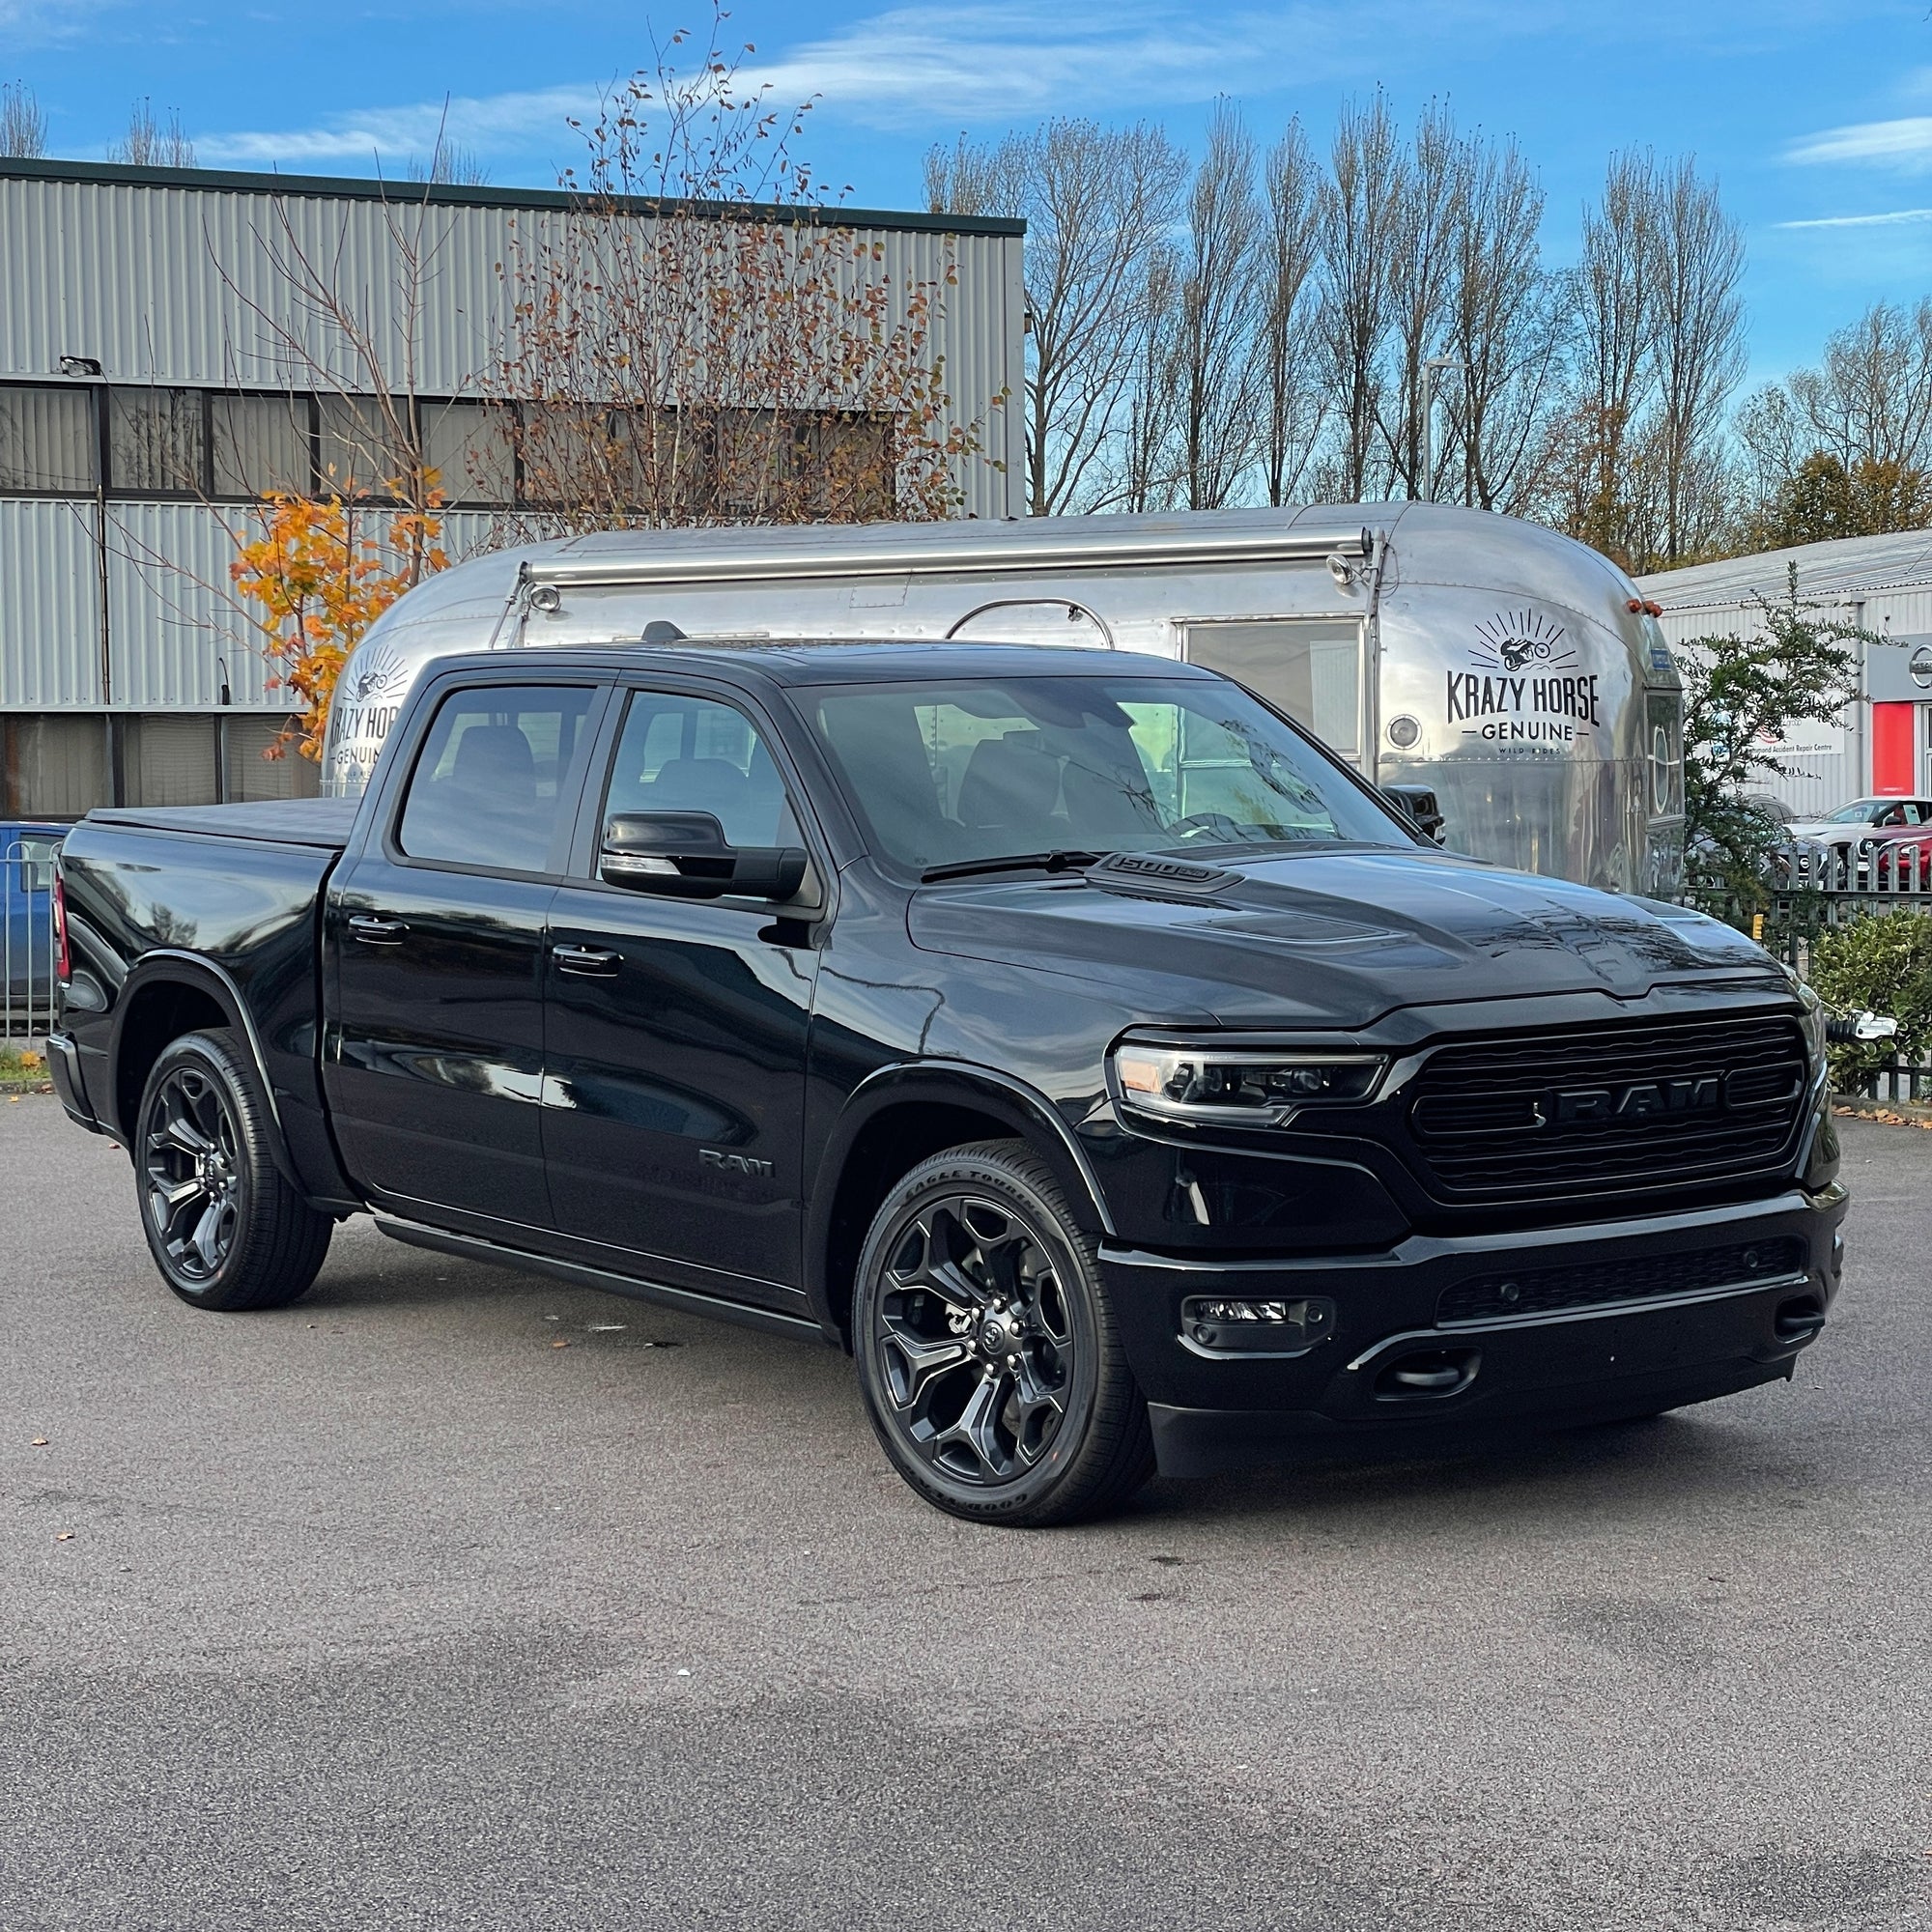 fast Munk kat SOLD - RAM 1500 LIMITED NIGHT EDITION CREW CAB - DIAMOND BLACK WITH BL -  Krazy Horse